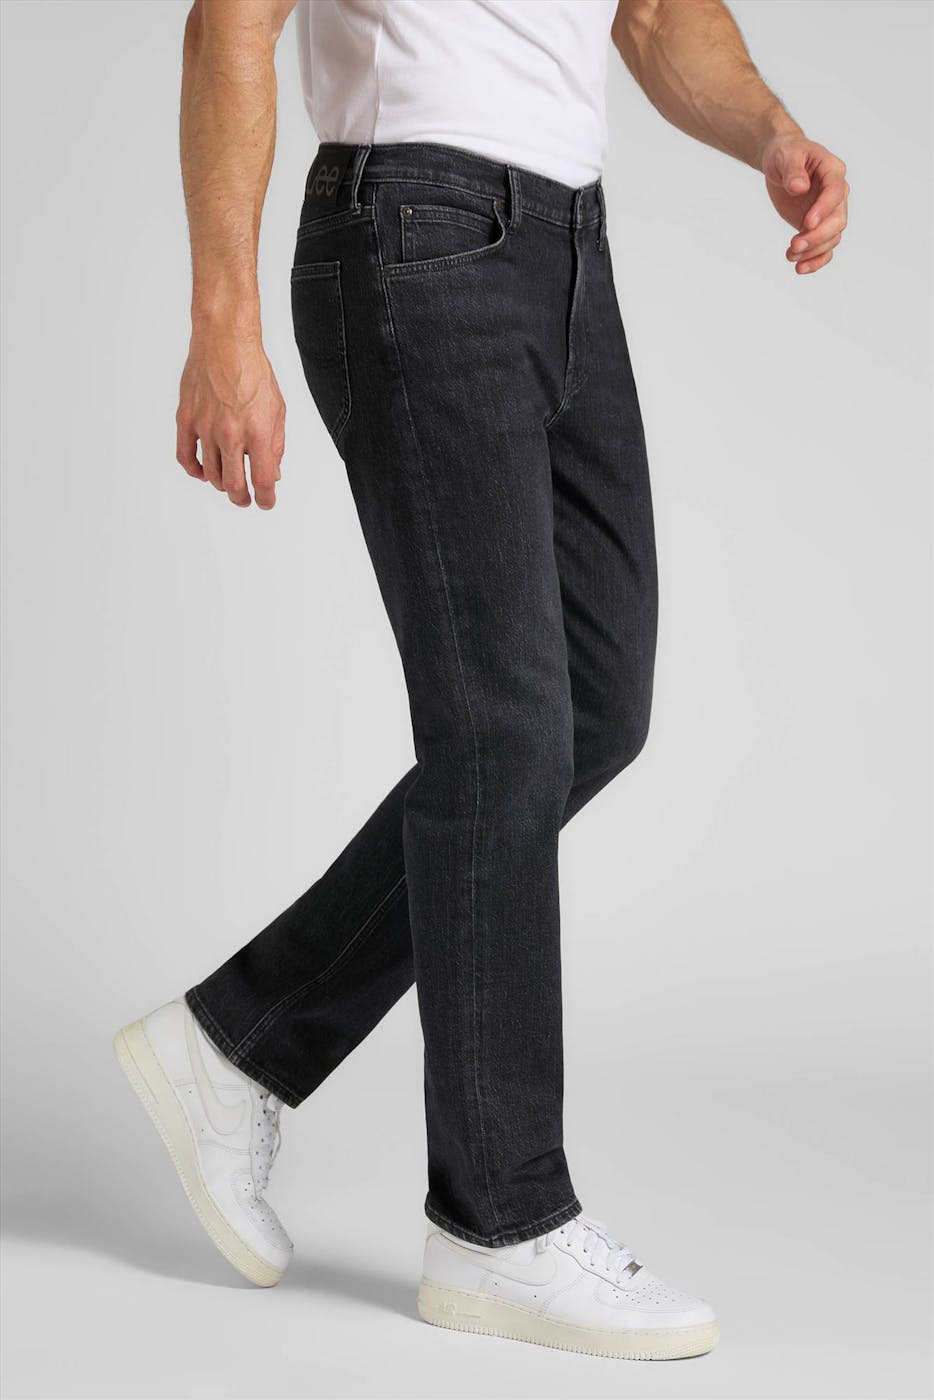 Lee - Zwarte West Relaxed Tapered jeans